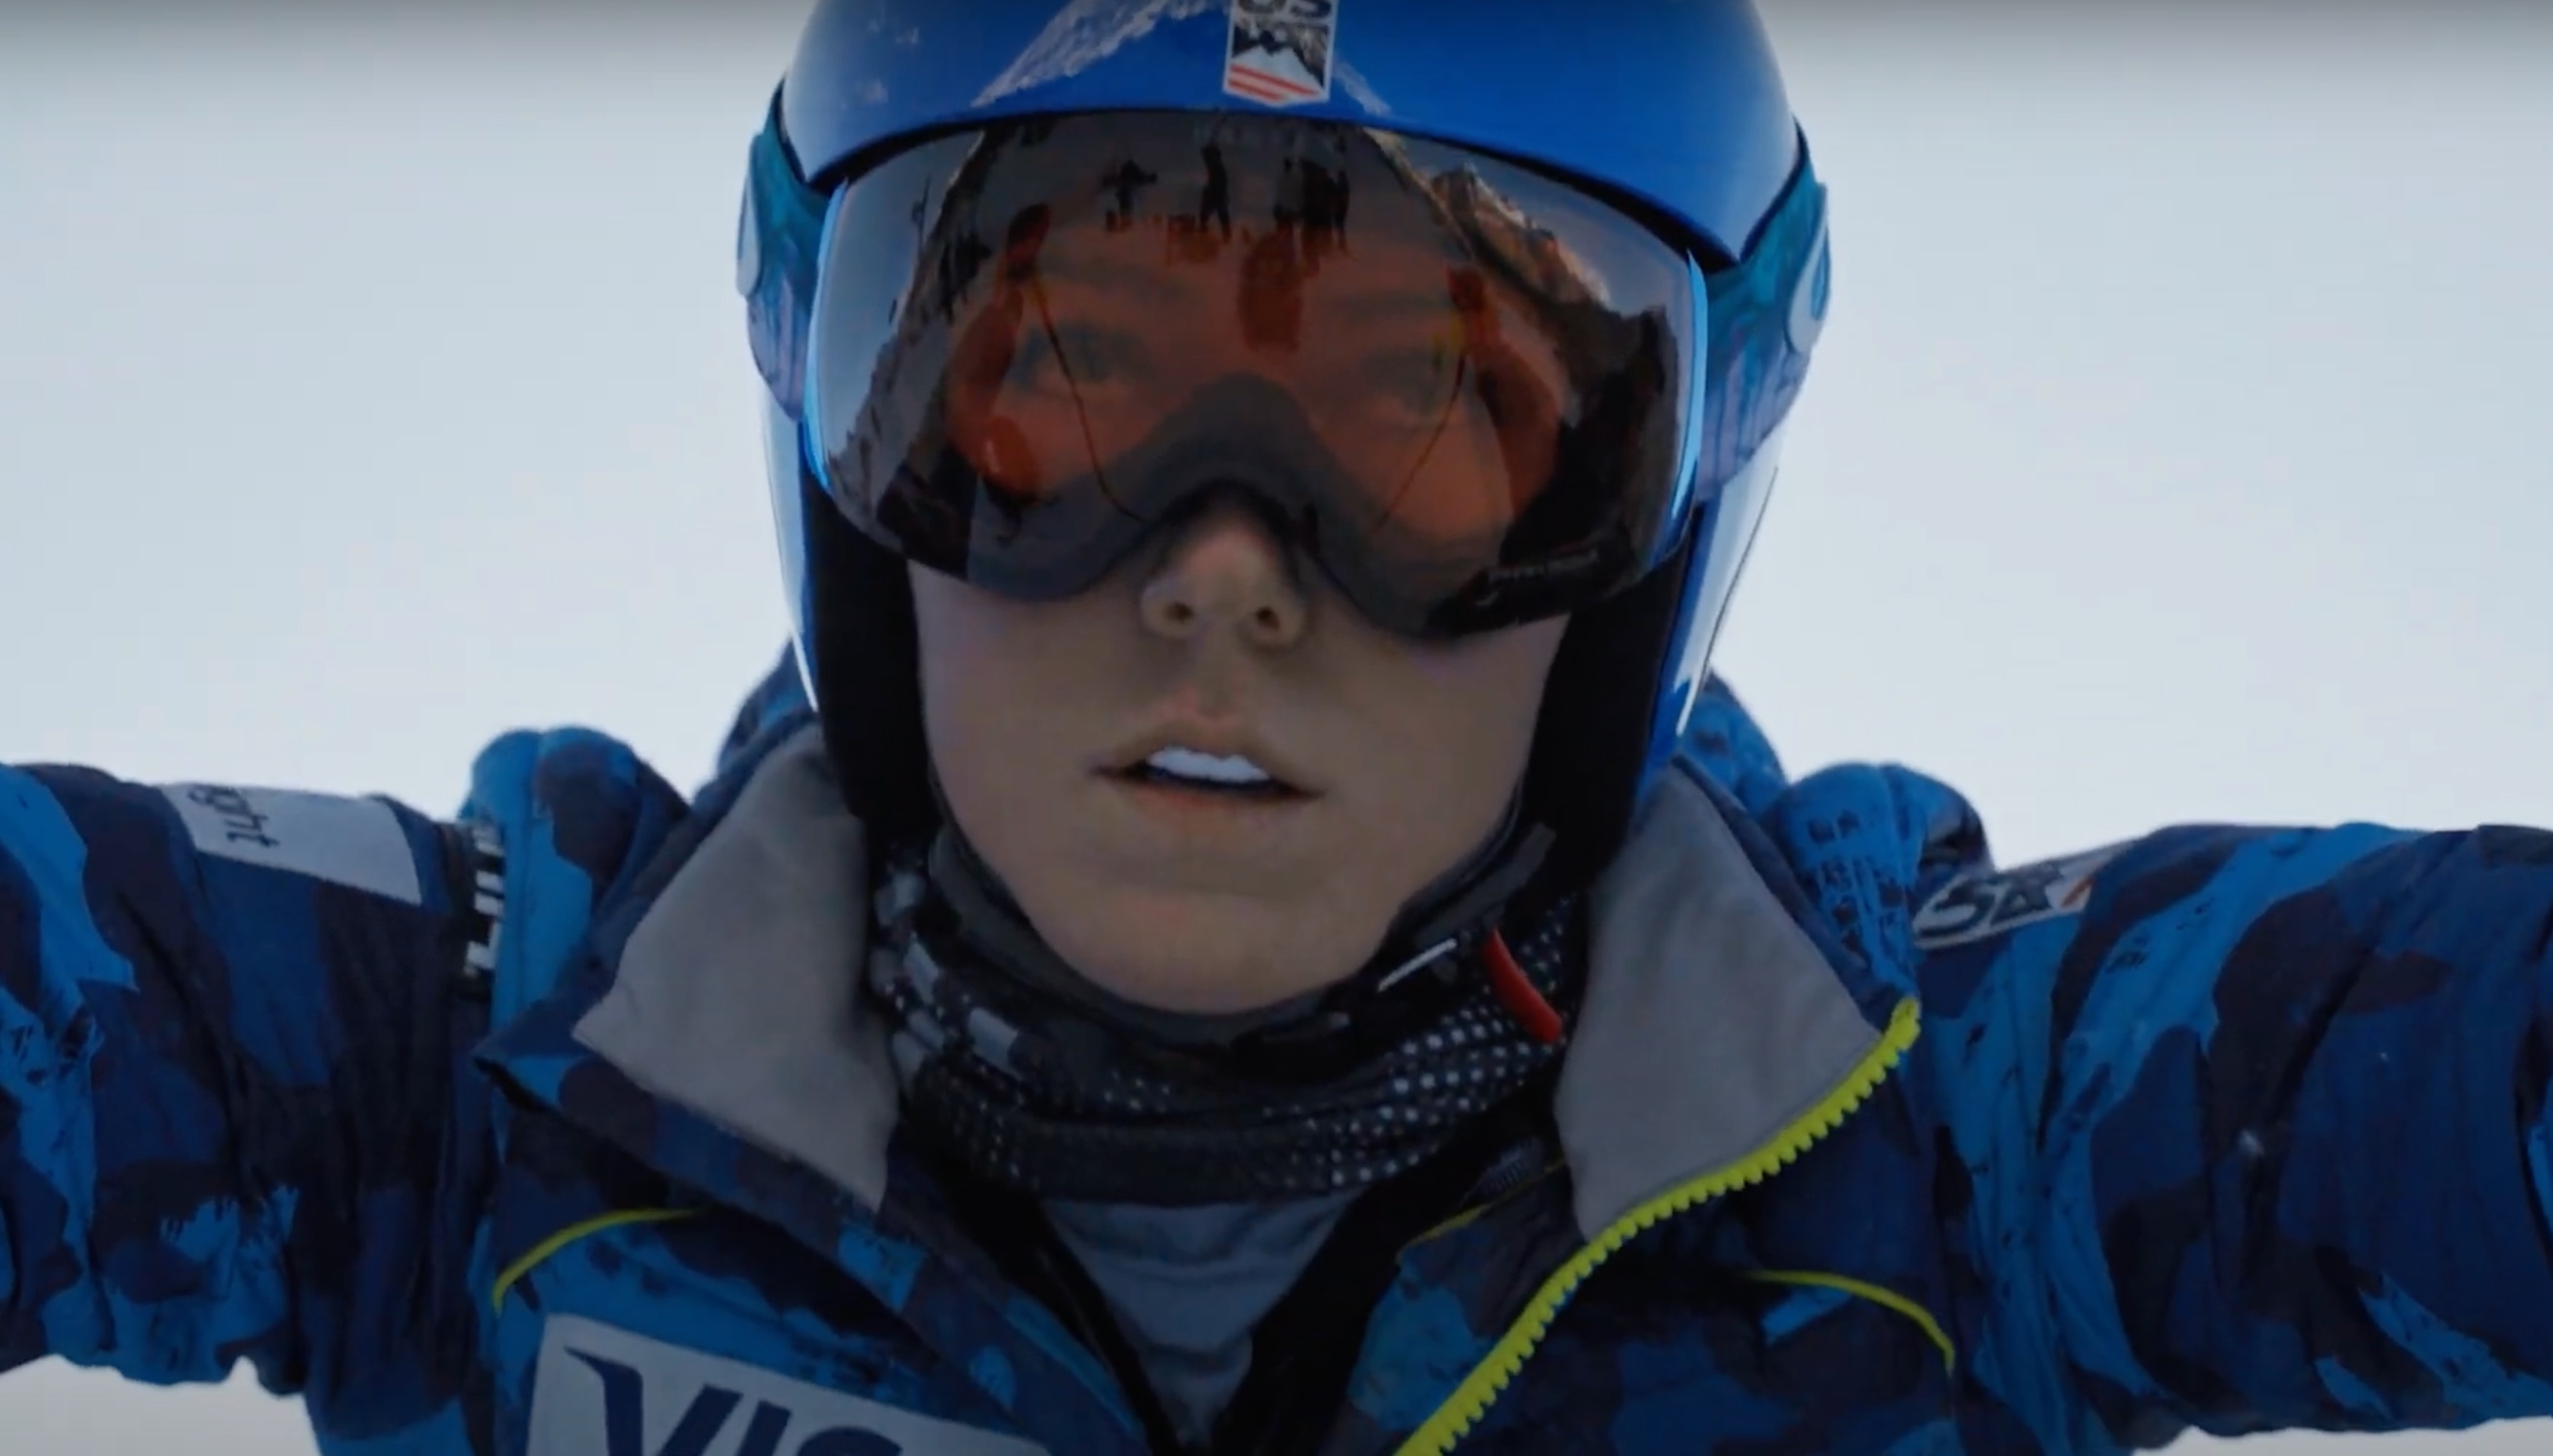 Oakley Debuts New Snow-Focused Documentary Series "Draw The Line"